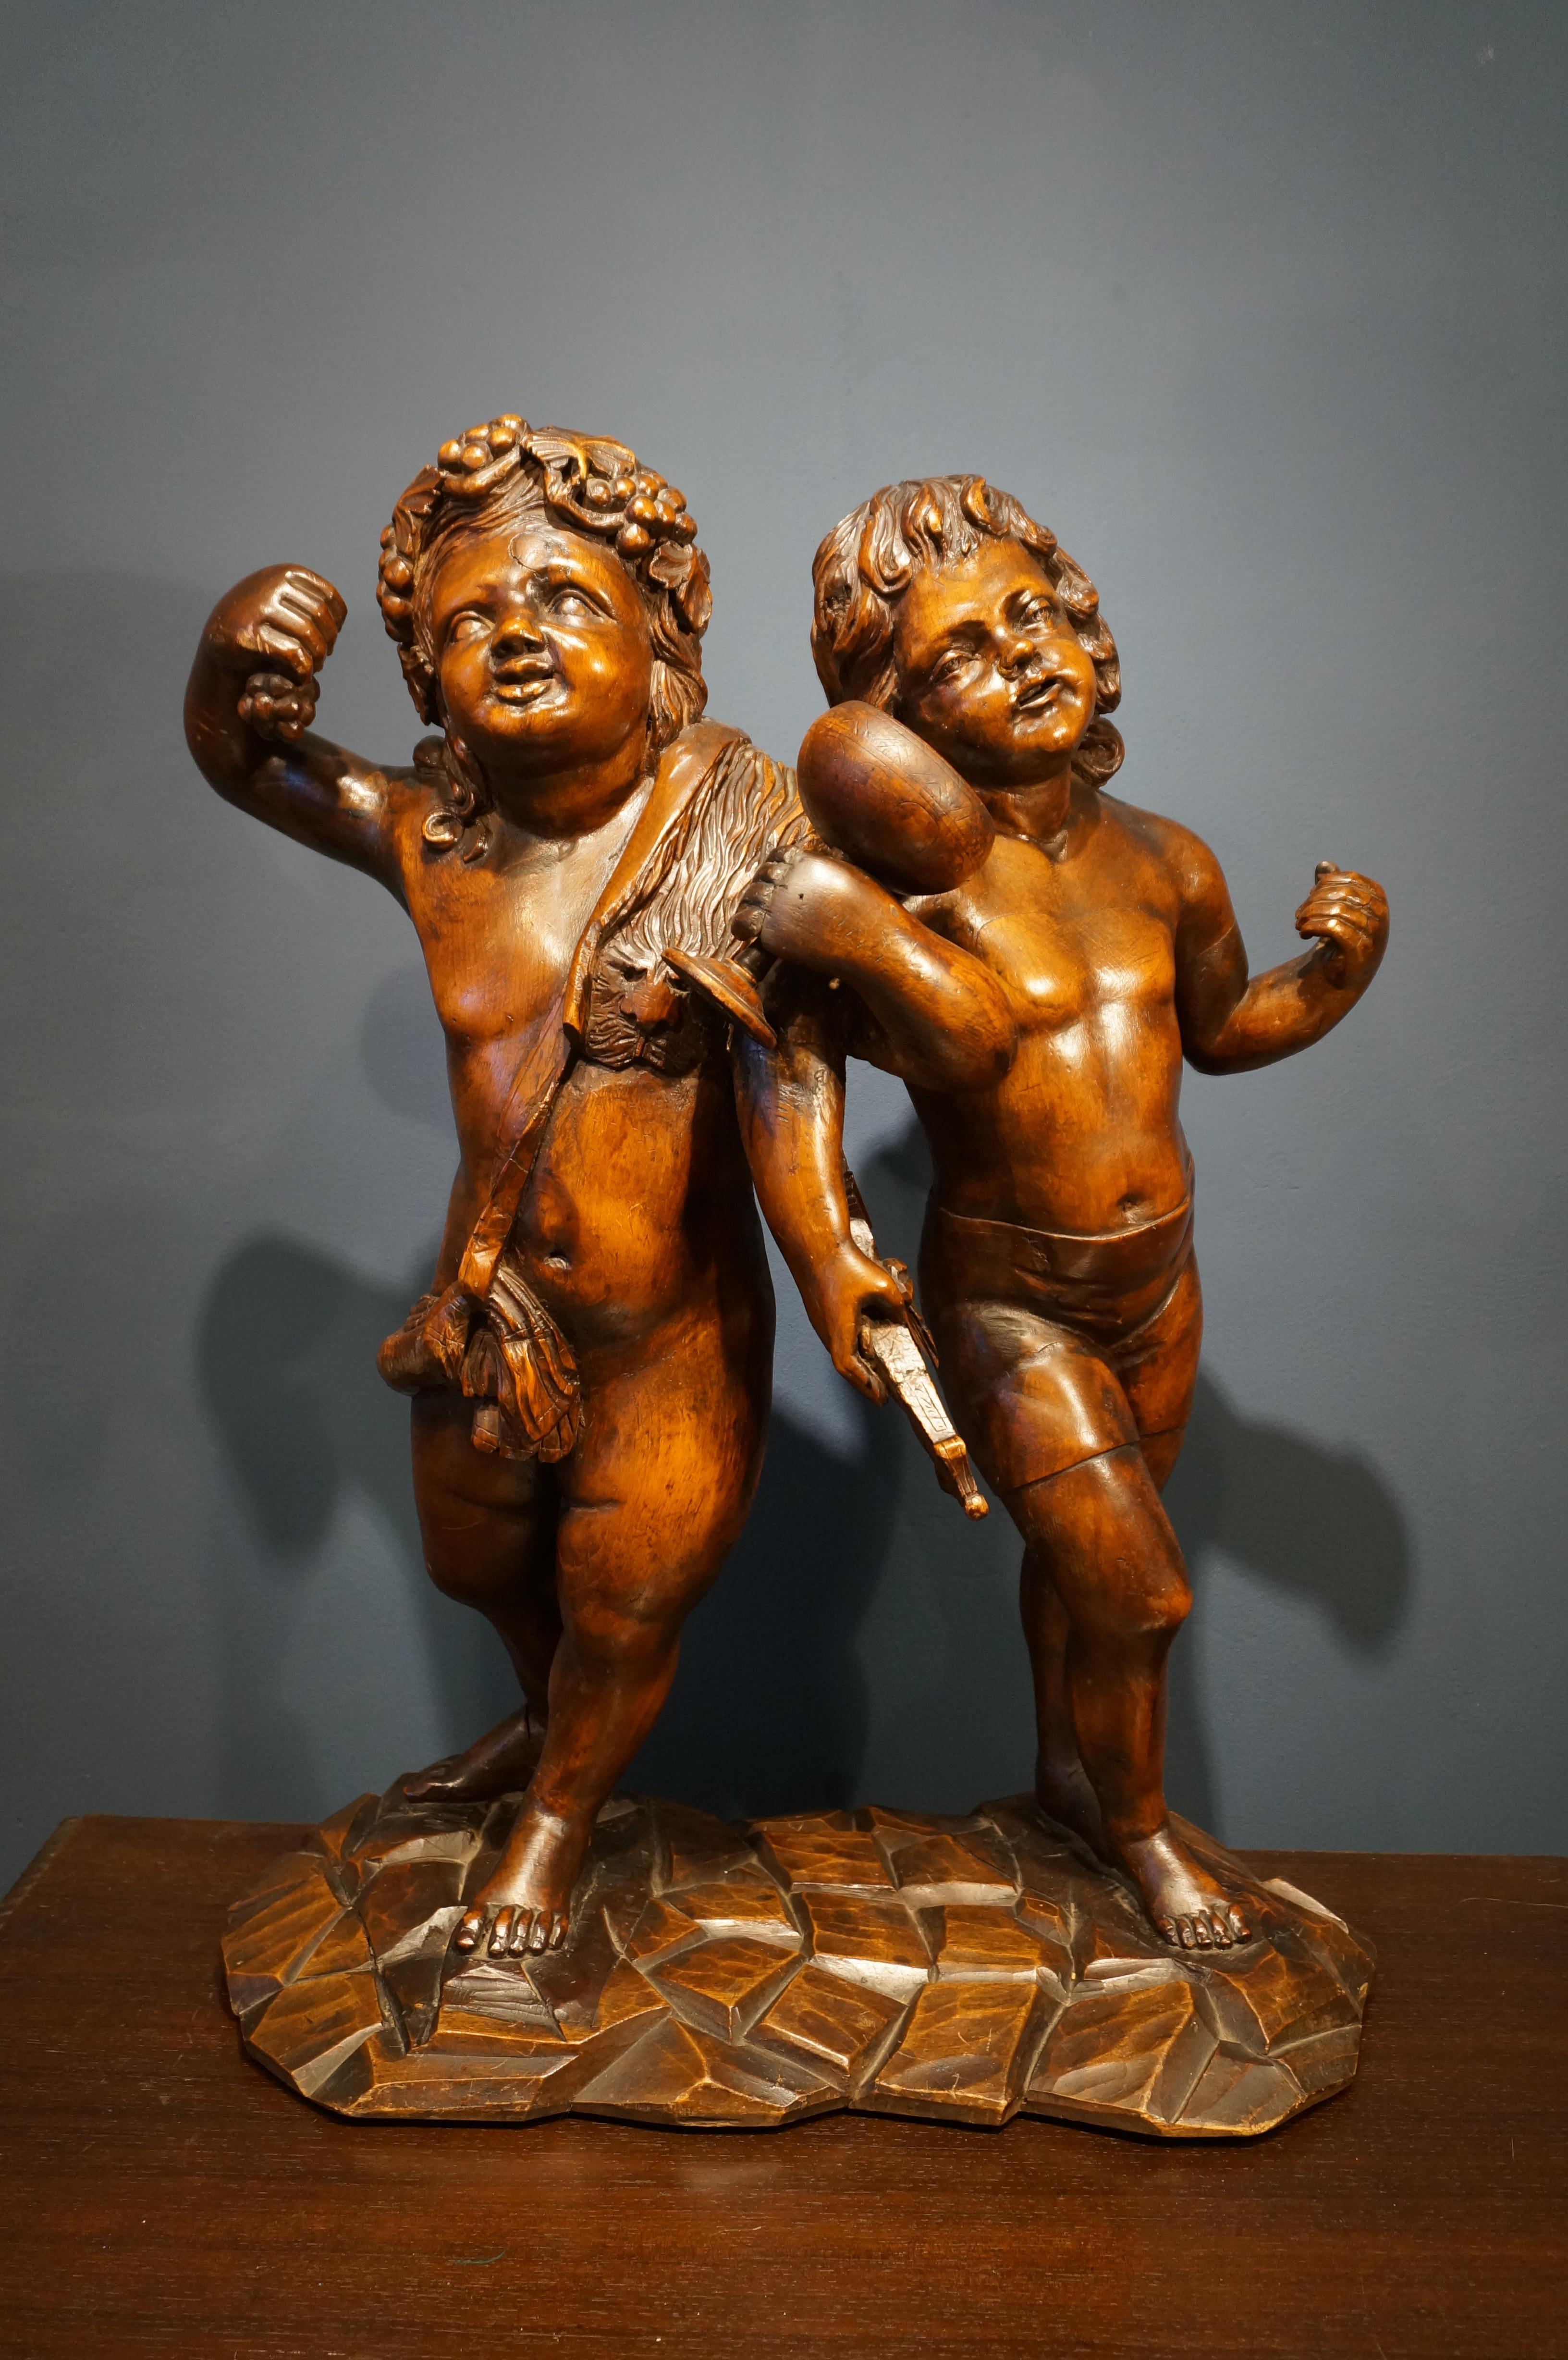 Handcarved baroque wooden sculpture depicting the two accomplises Bacchus and Amor.
Bacchus is wearing a grapevine in his hair and holds up a bunch of grapes. A jaguar skin is draped around his shoulder and in his left hand he holds a goblet.